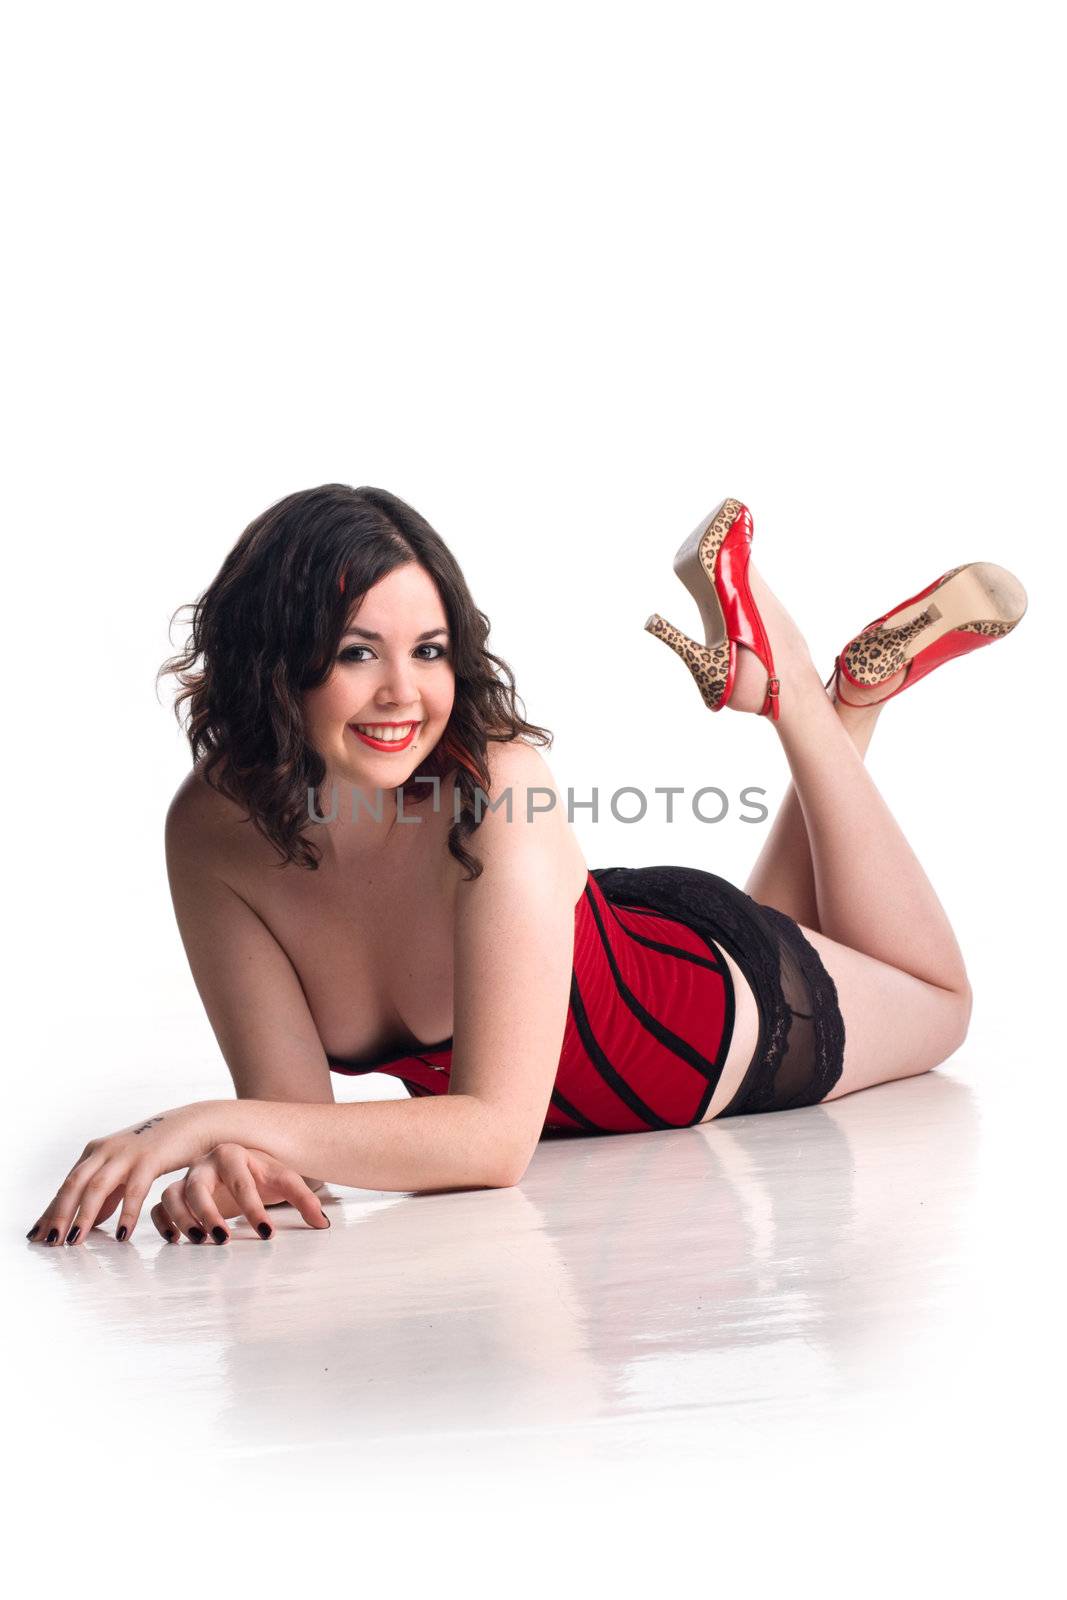 Cute girl in pin-up pose and red corset